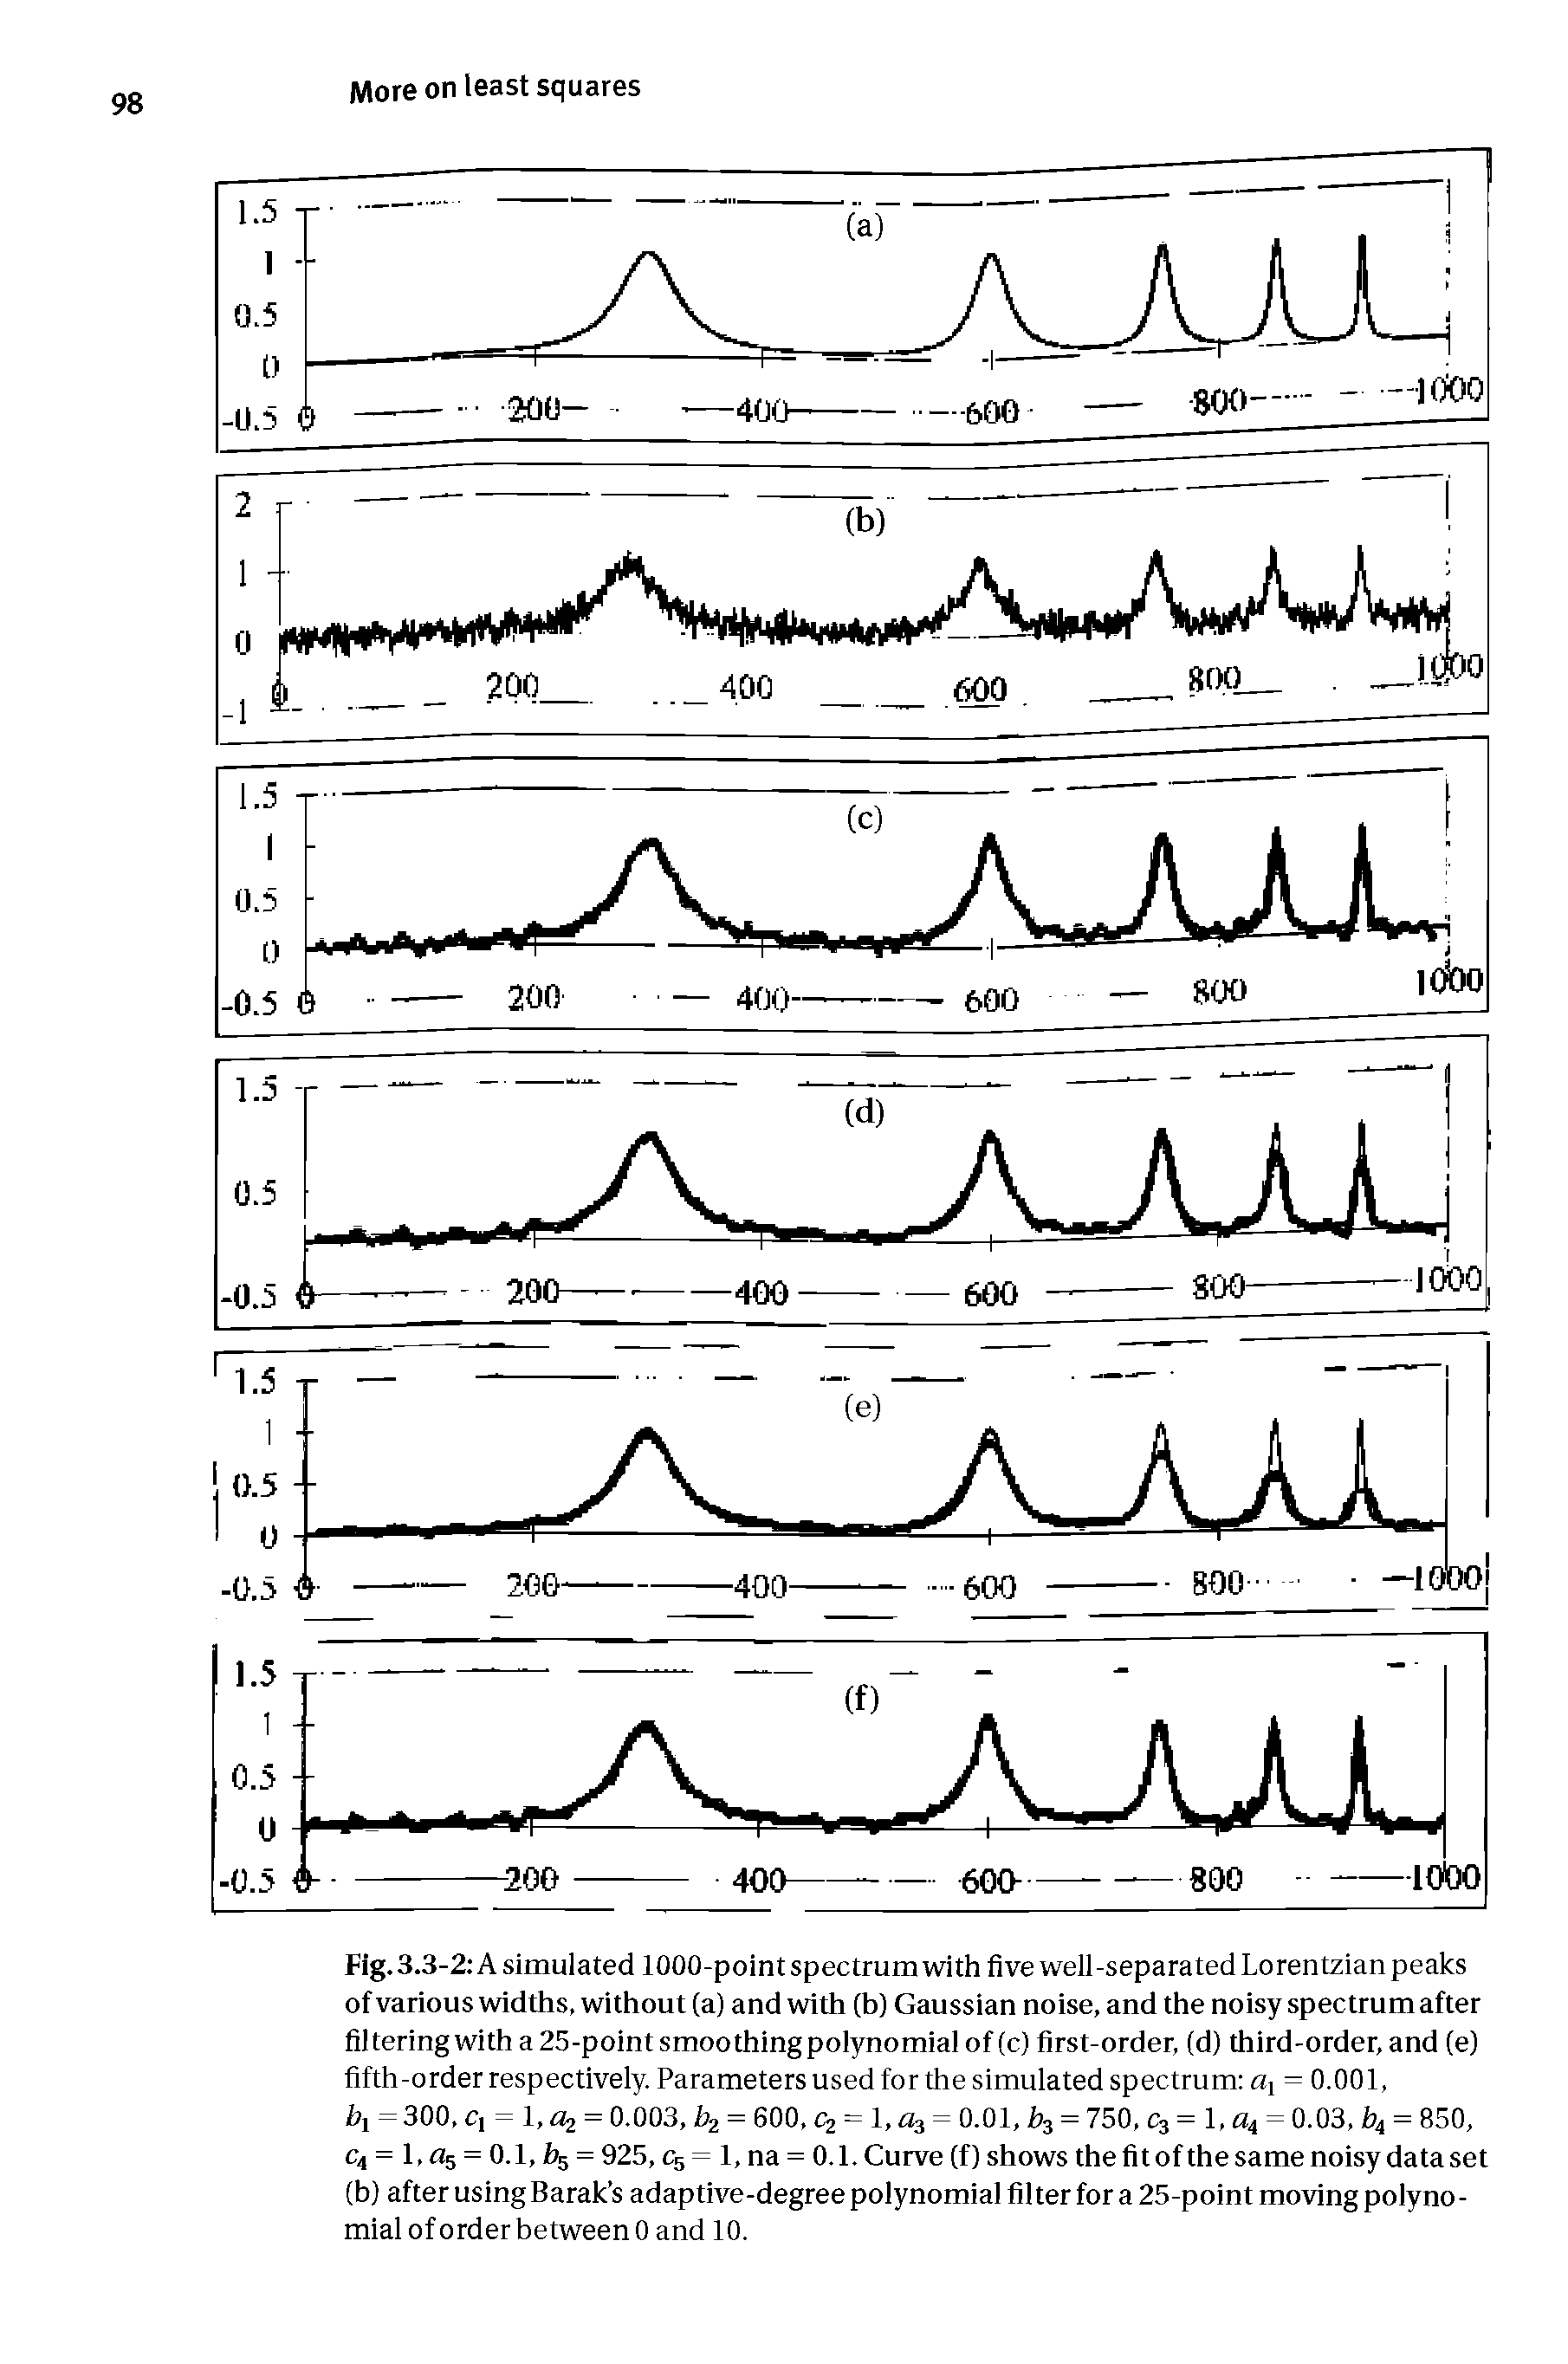 Fig. 3.3-2 A simulated 1000-point spectrum with five well-separated Lorentzian peaks of various widths, without (a) and with (b) Gaussian noise, and the noisy spectrum after filtering with a 25-point smoothingpolynomial of (c) first-order, (d) third-order, and (e) fifth-order respectively. Parameters used for the simulated spectrum ax = 0.001, b4 = 300, c, = 1, 2 = 0.003, b2 = 600, c2 = 1, a3 = 0.01, b3 = 750, c3=l,a4 = 0.03, b4 = 850, c4 = 1,<% = 0.1, b5 = 925, c5= 1, na = 0.1. Curve (f) shows the fit of the same noisy data set (b) after using Barak s adaptive-degree polynomial filter for a 25-point moving polynomial of order between 0 and 10.